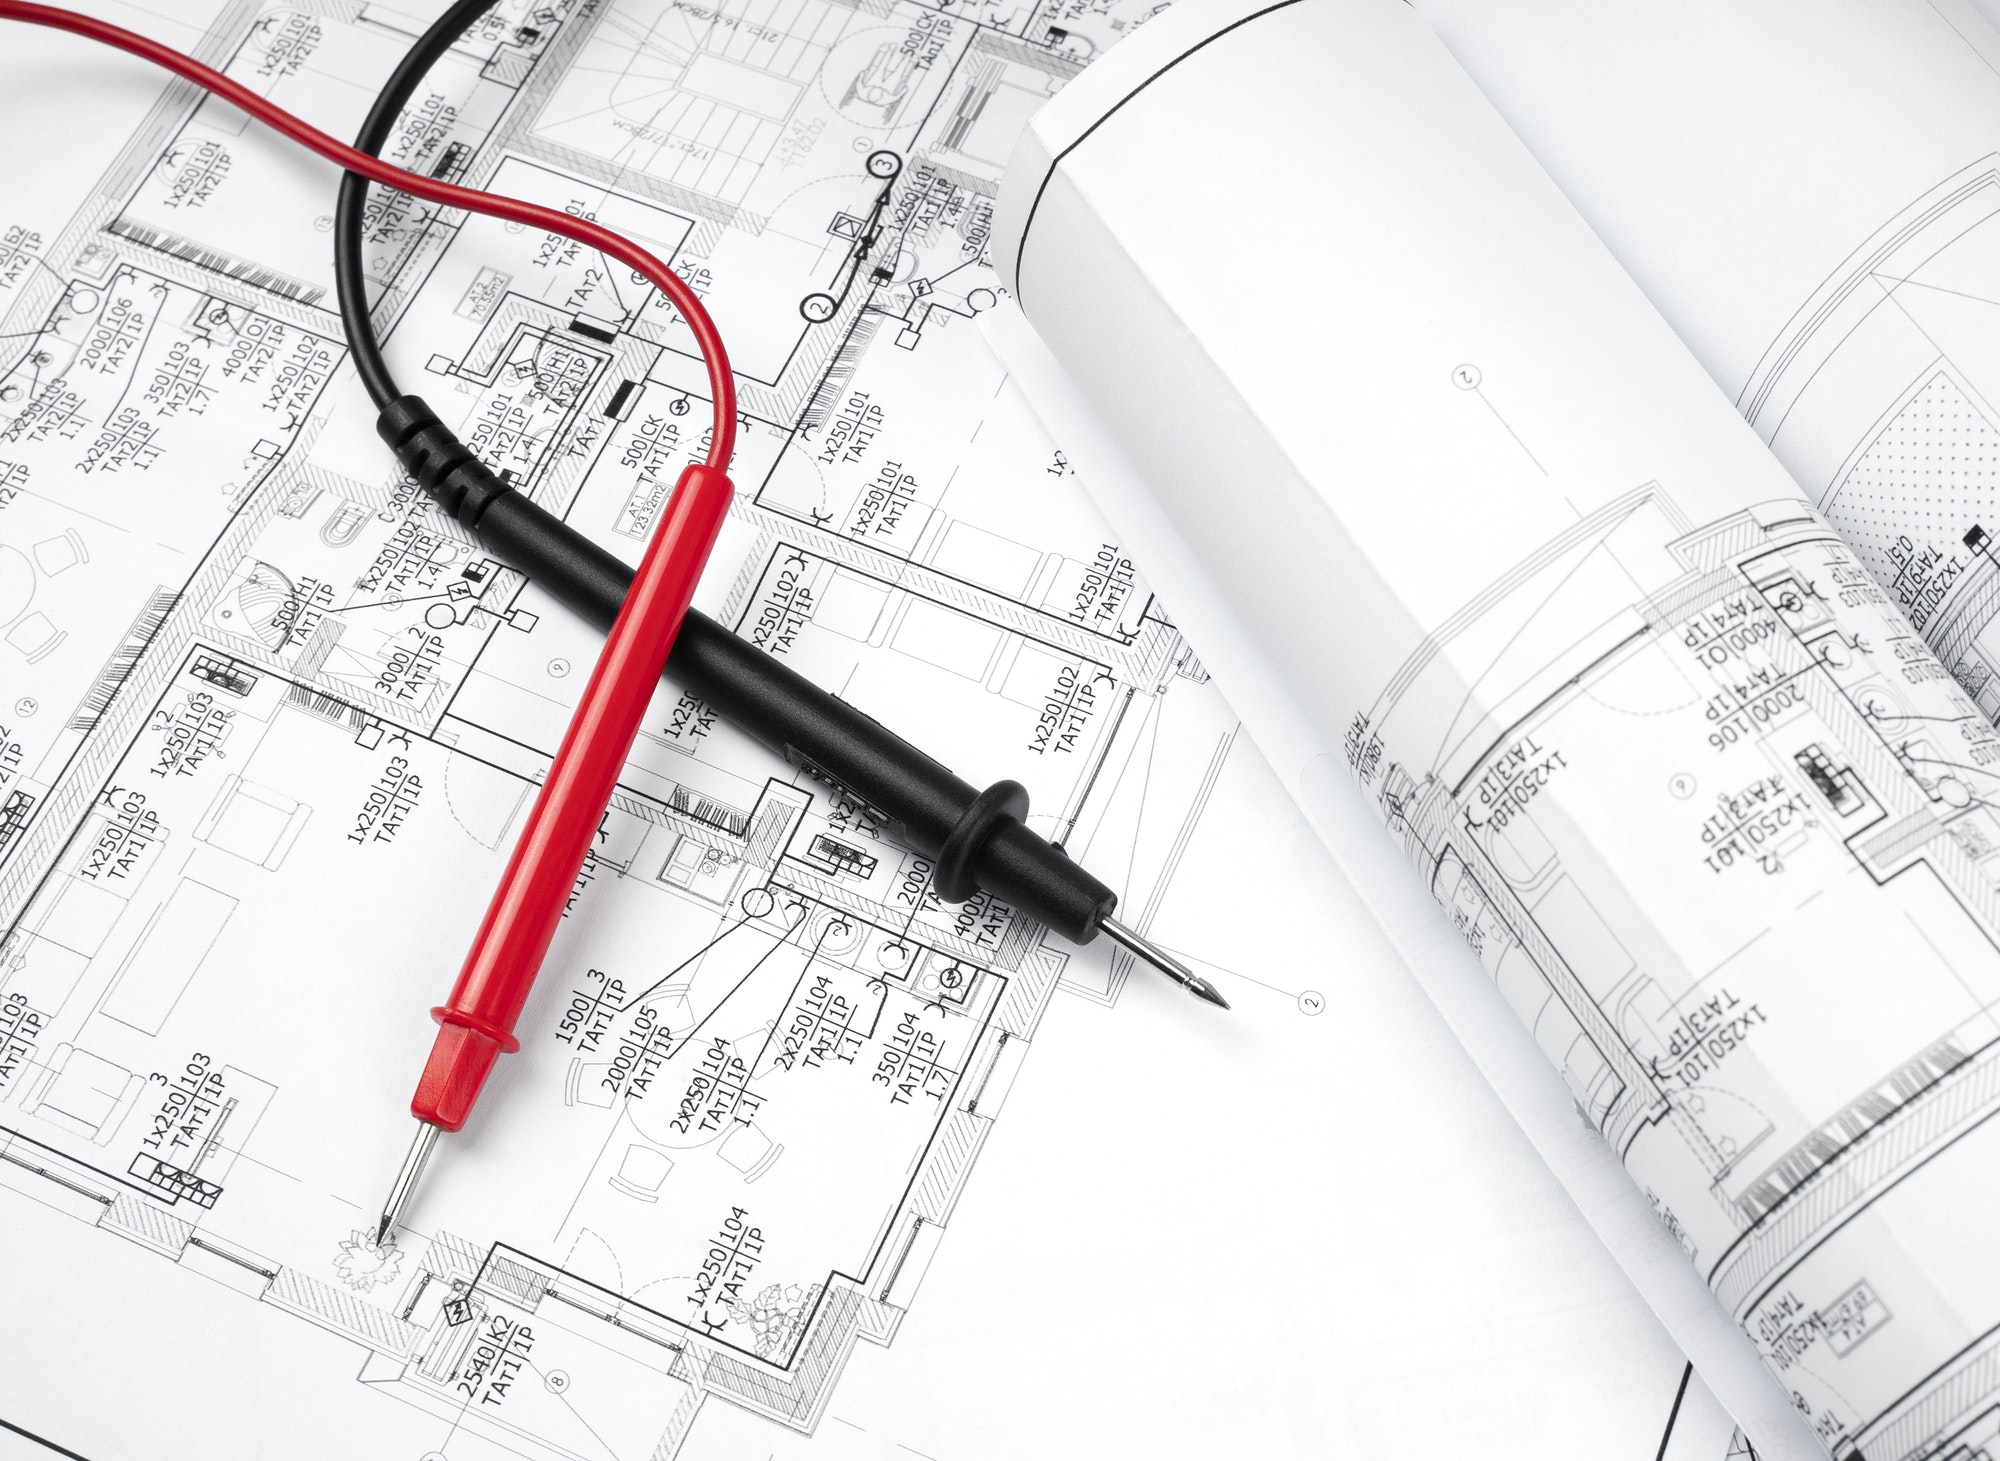 The plan of electrical installation with multimeter